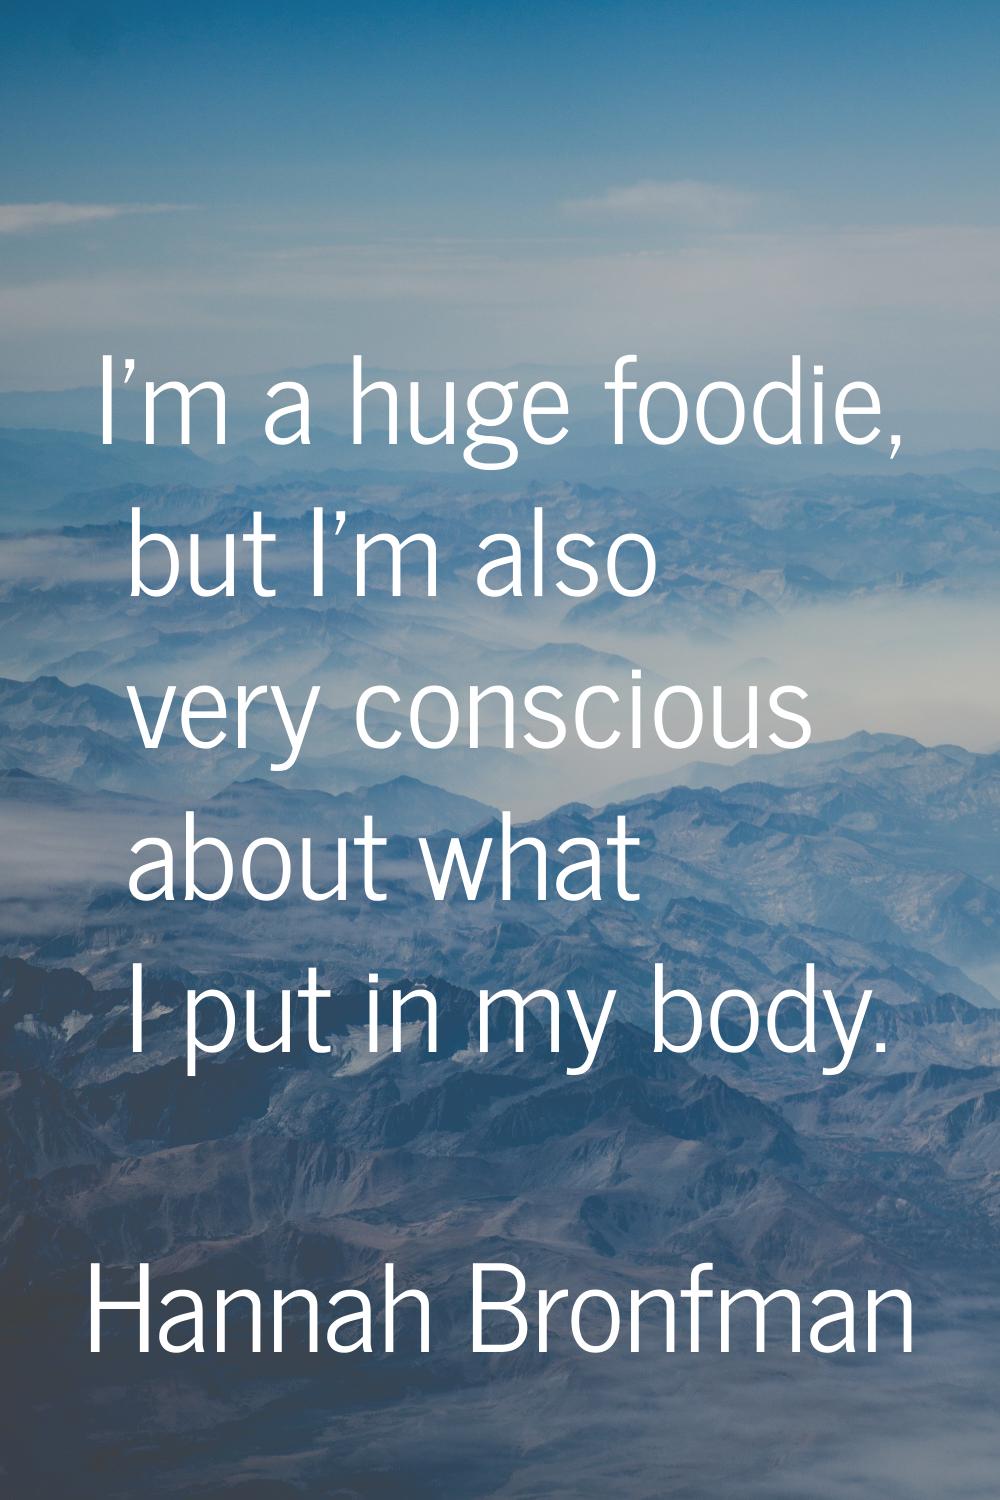 I'm a huge foodie, but I'm also very conscious about what I put in my body.